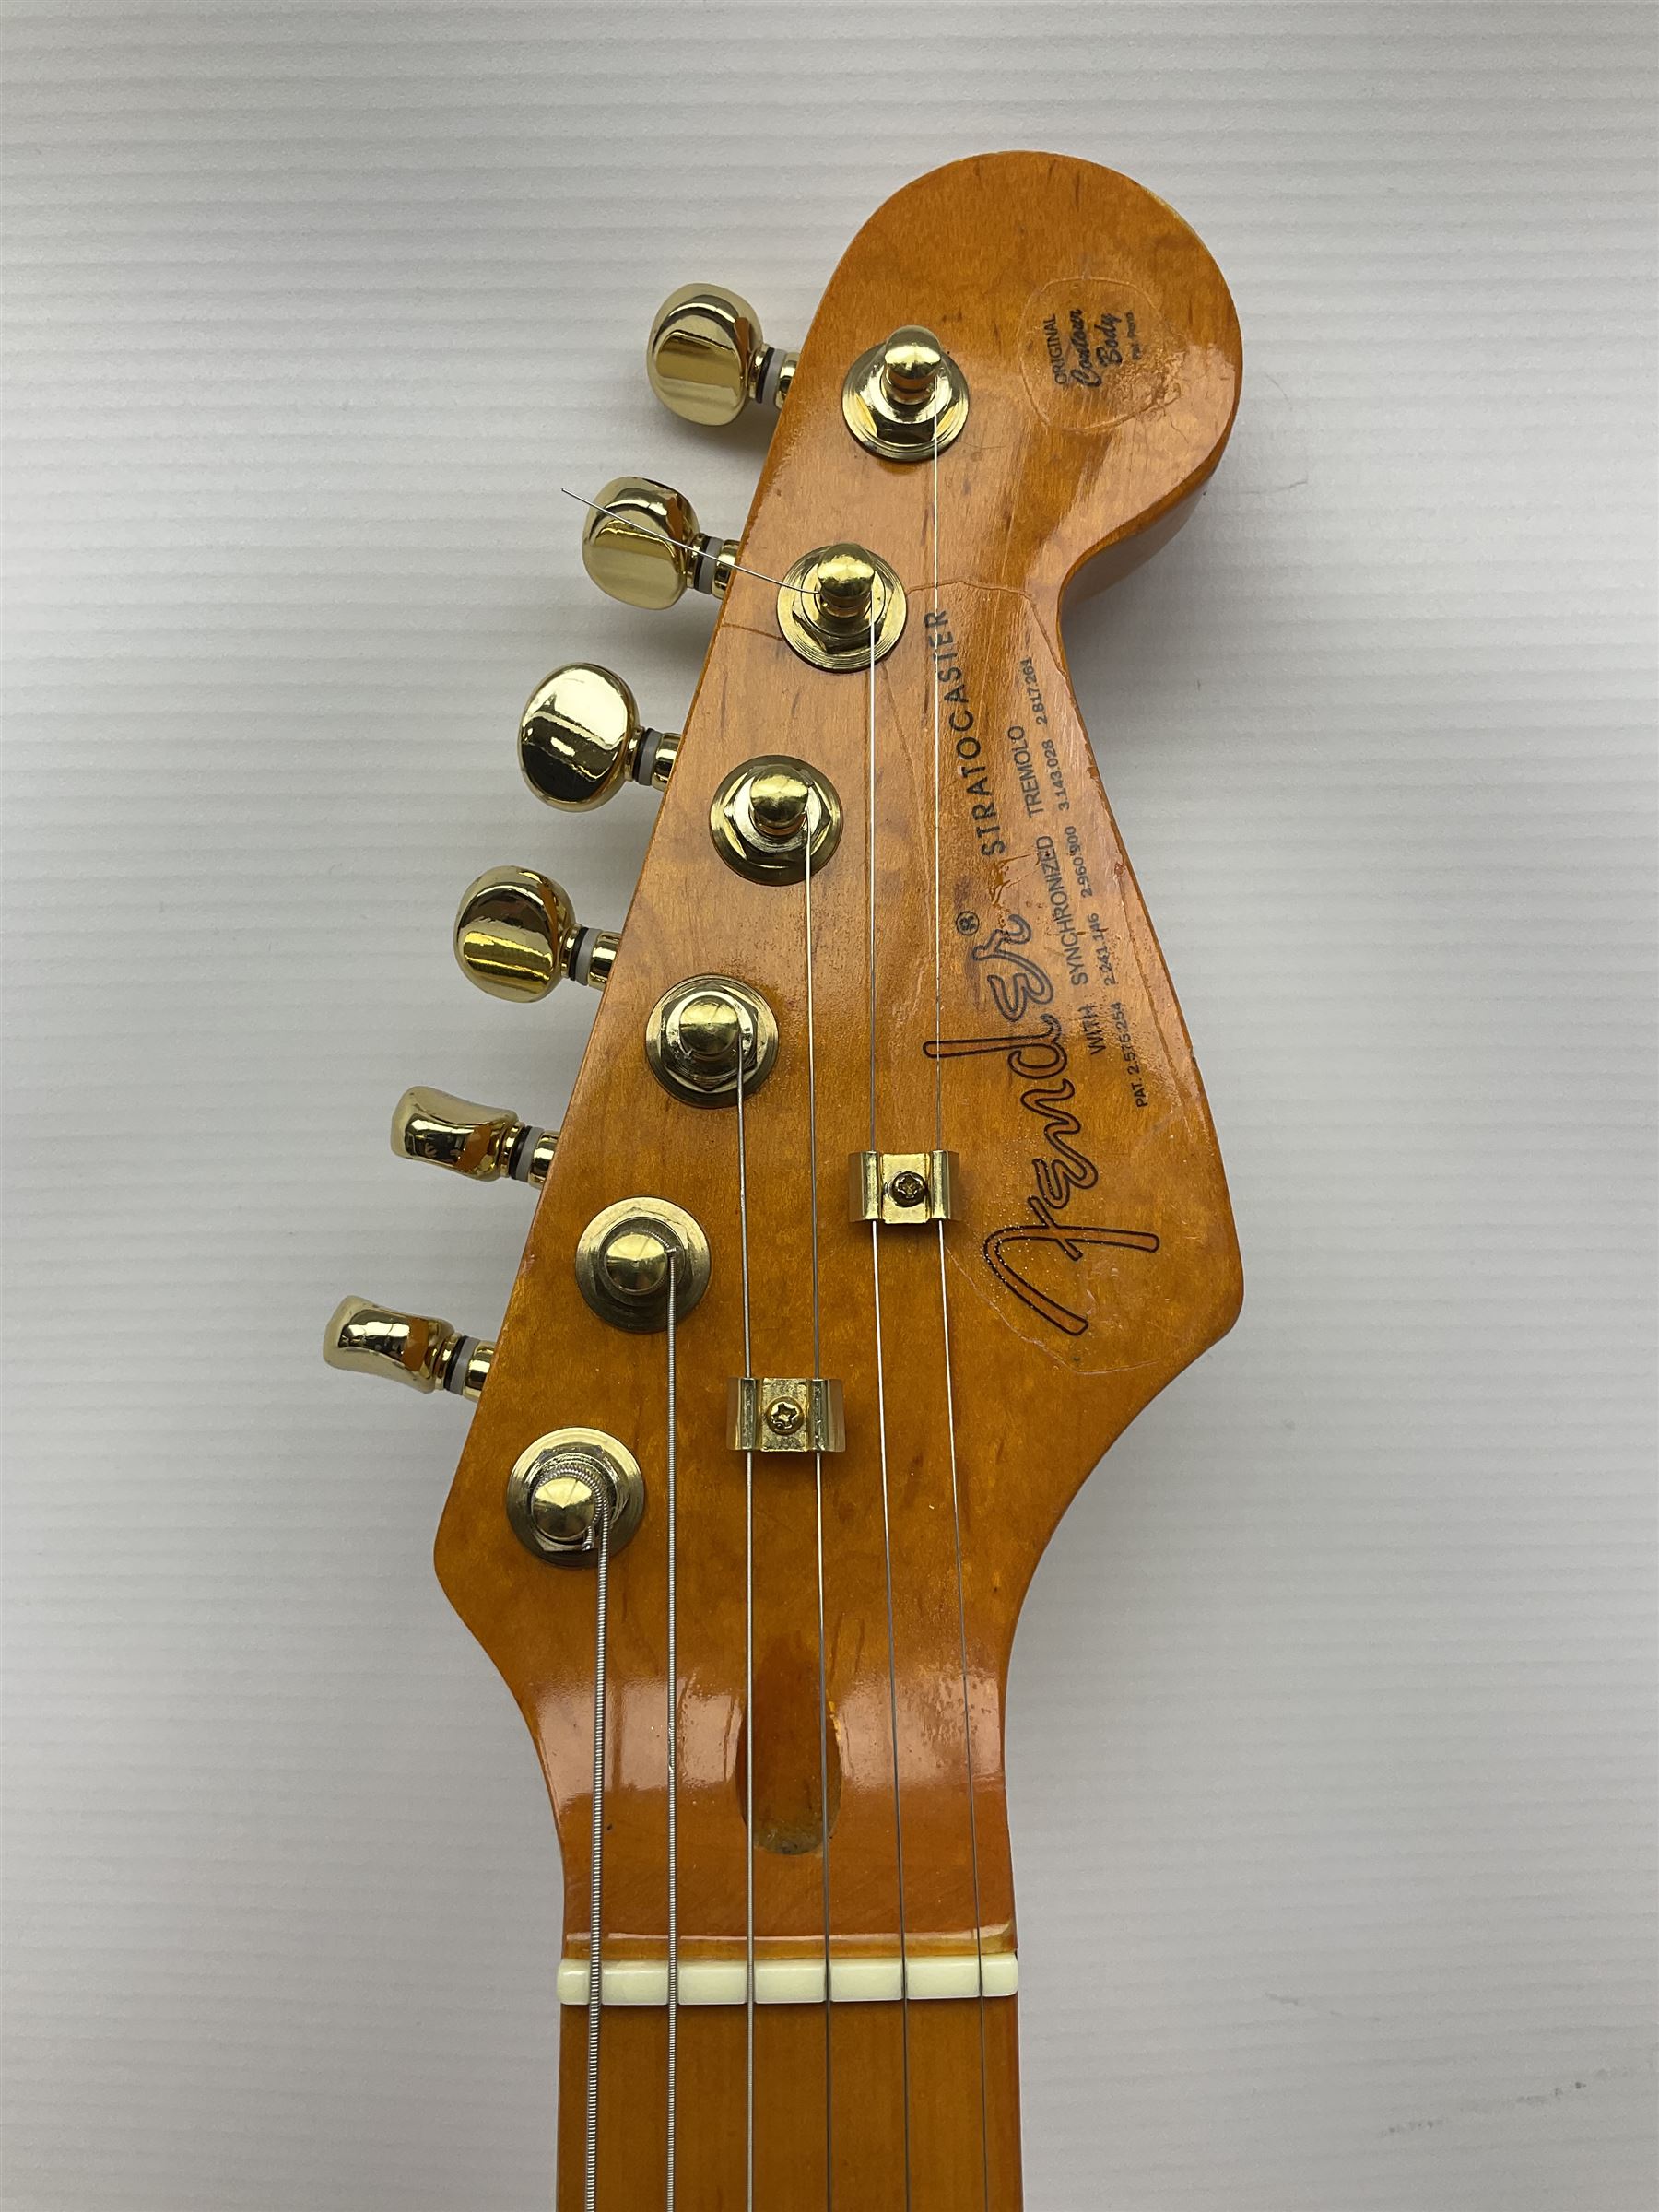 Copy of a Fender Stratocaster electric guitar in black with Wilkinson bridge - Image 7 of 21